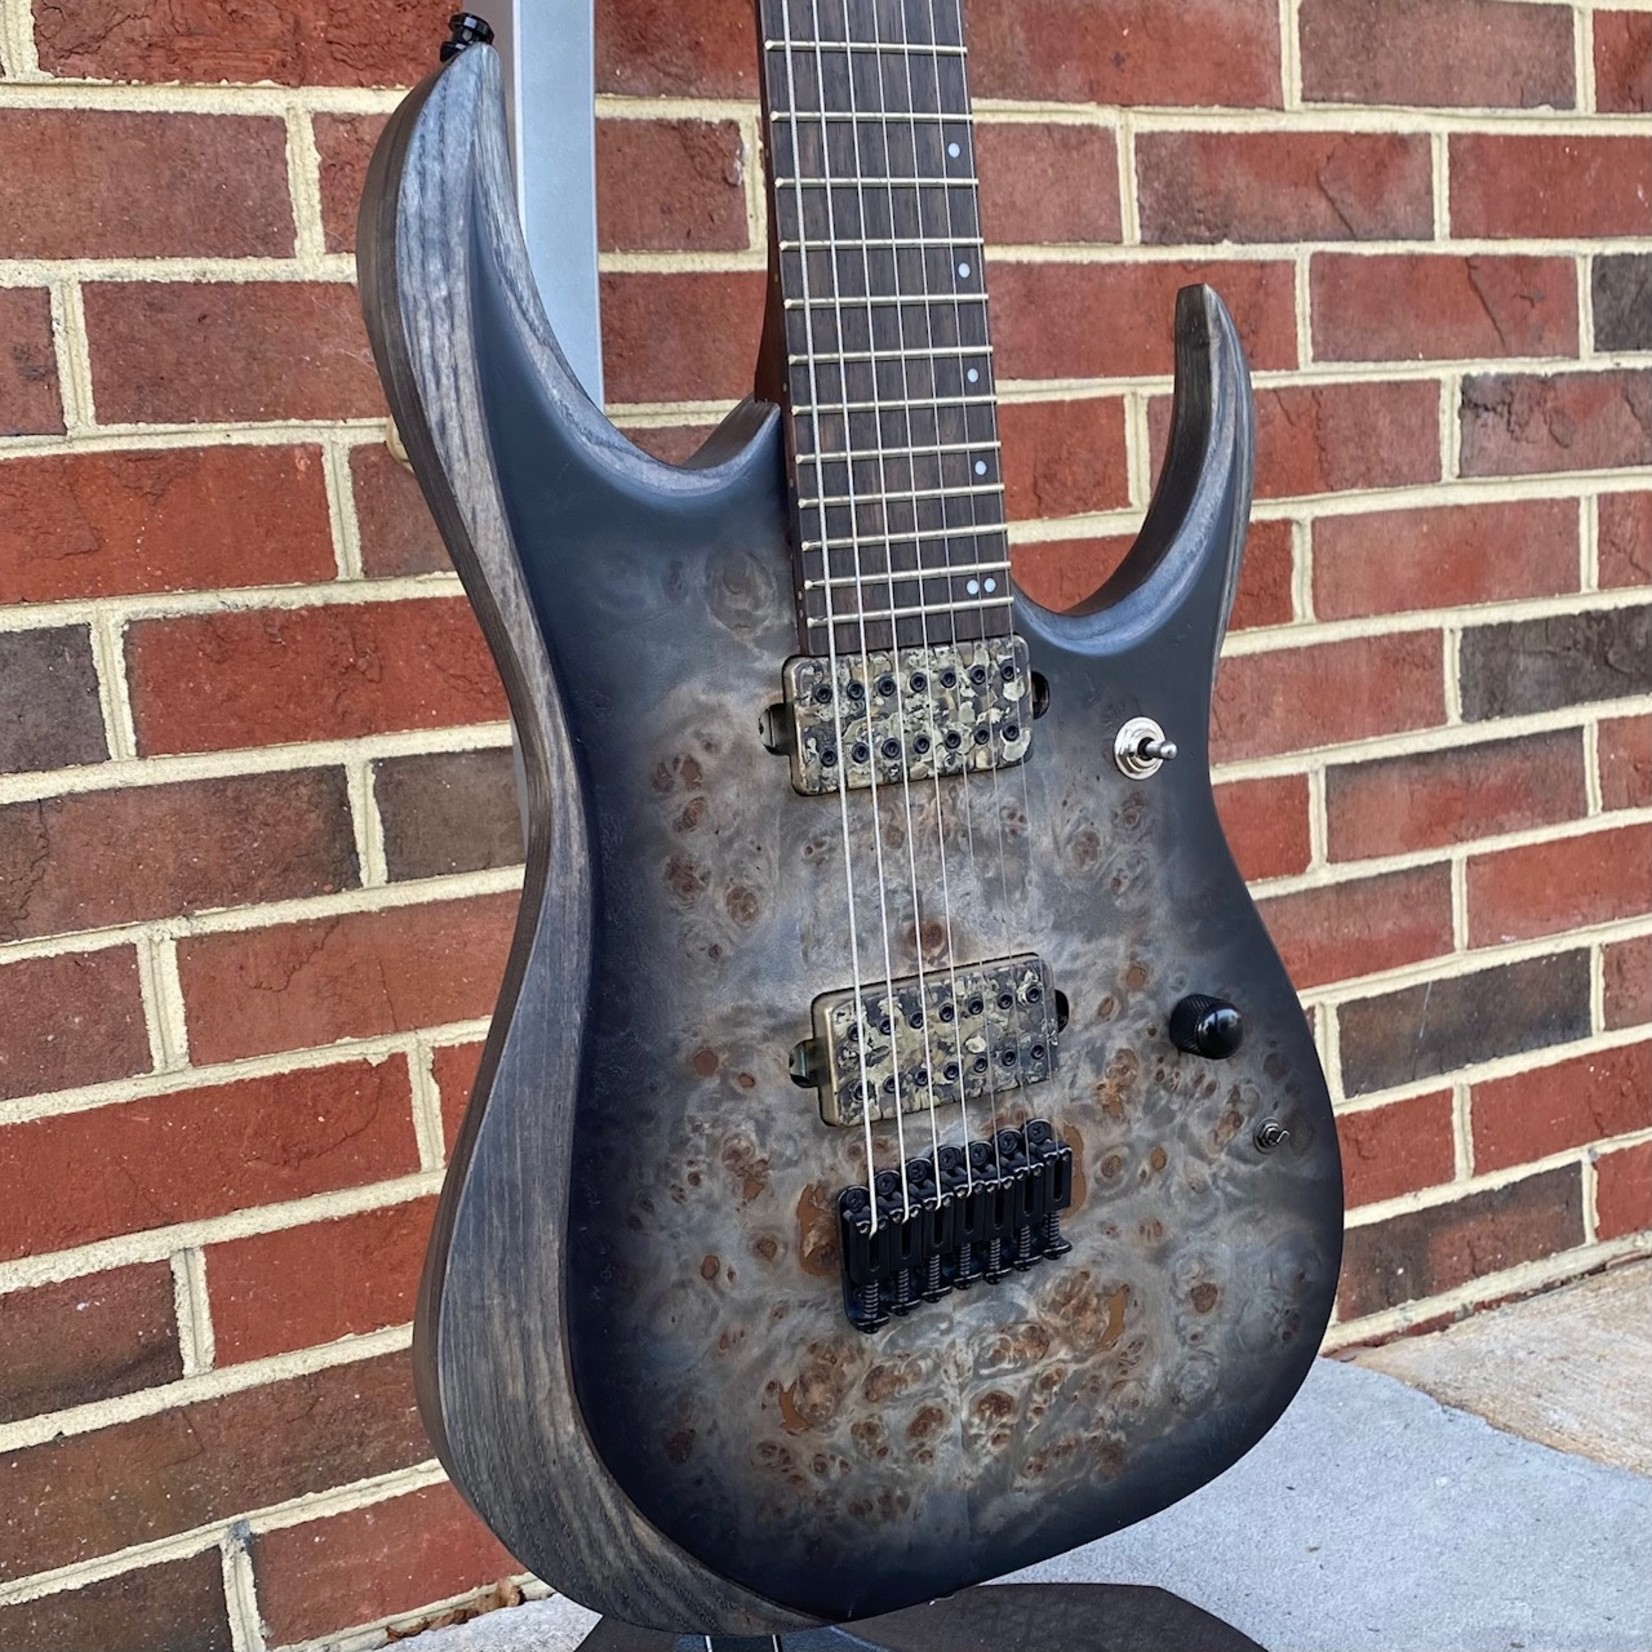 Ibanez Ibanez RGD71ALPACKF Axion Label, Charcoal Burst Black Stained Flat, Bareknuckle Aftermath Pickups, SN# I210323525